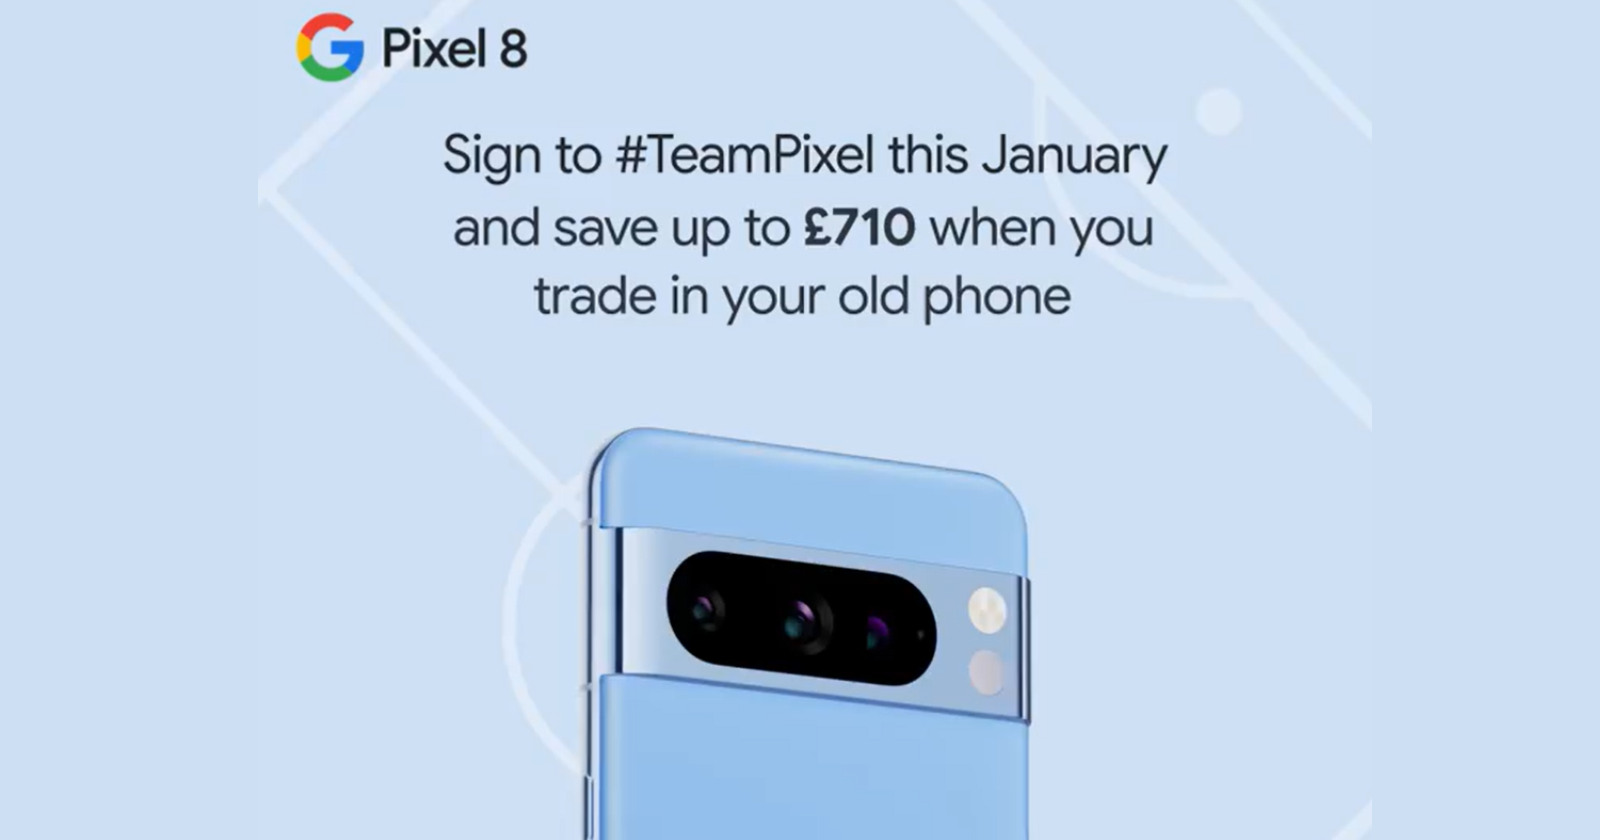 Google offering huge trade-in deals when you buy the Pixel 8 or 8 Pro in the UK